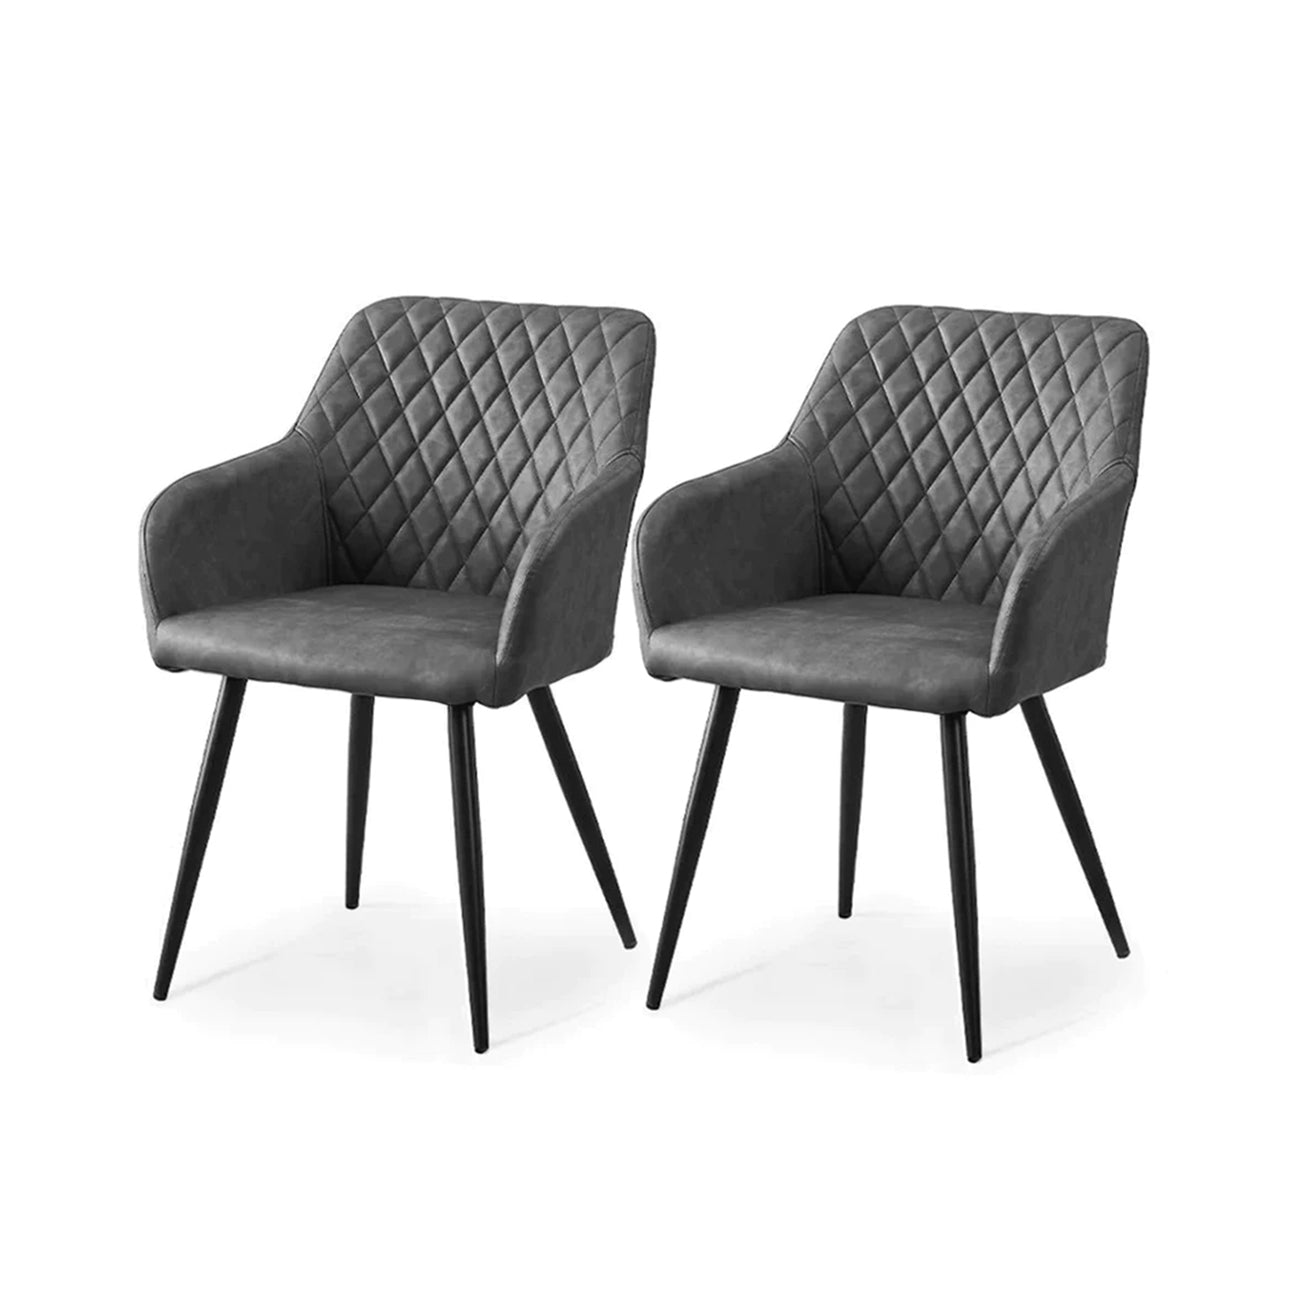 Frazer Diamond Dining Chairs [Set of 2] [Faux Leather]